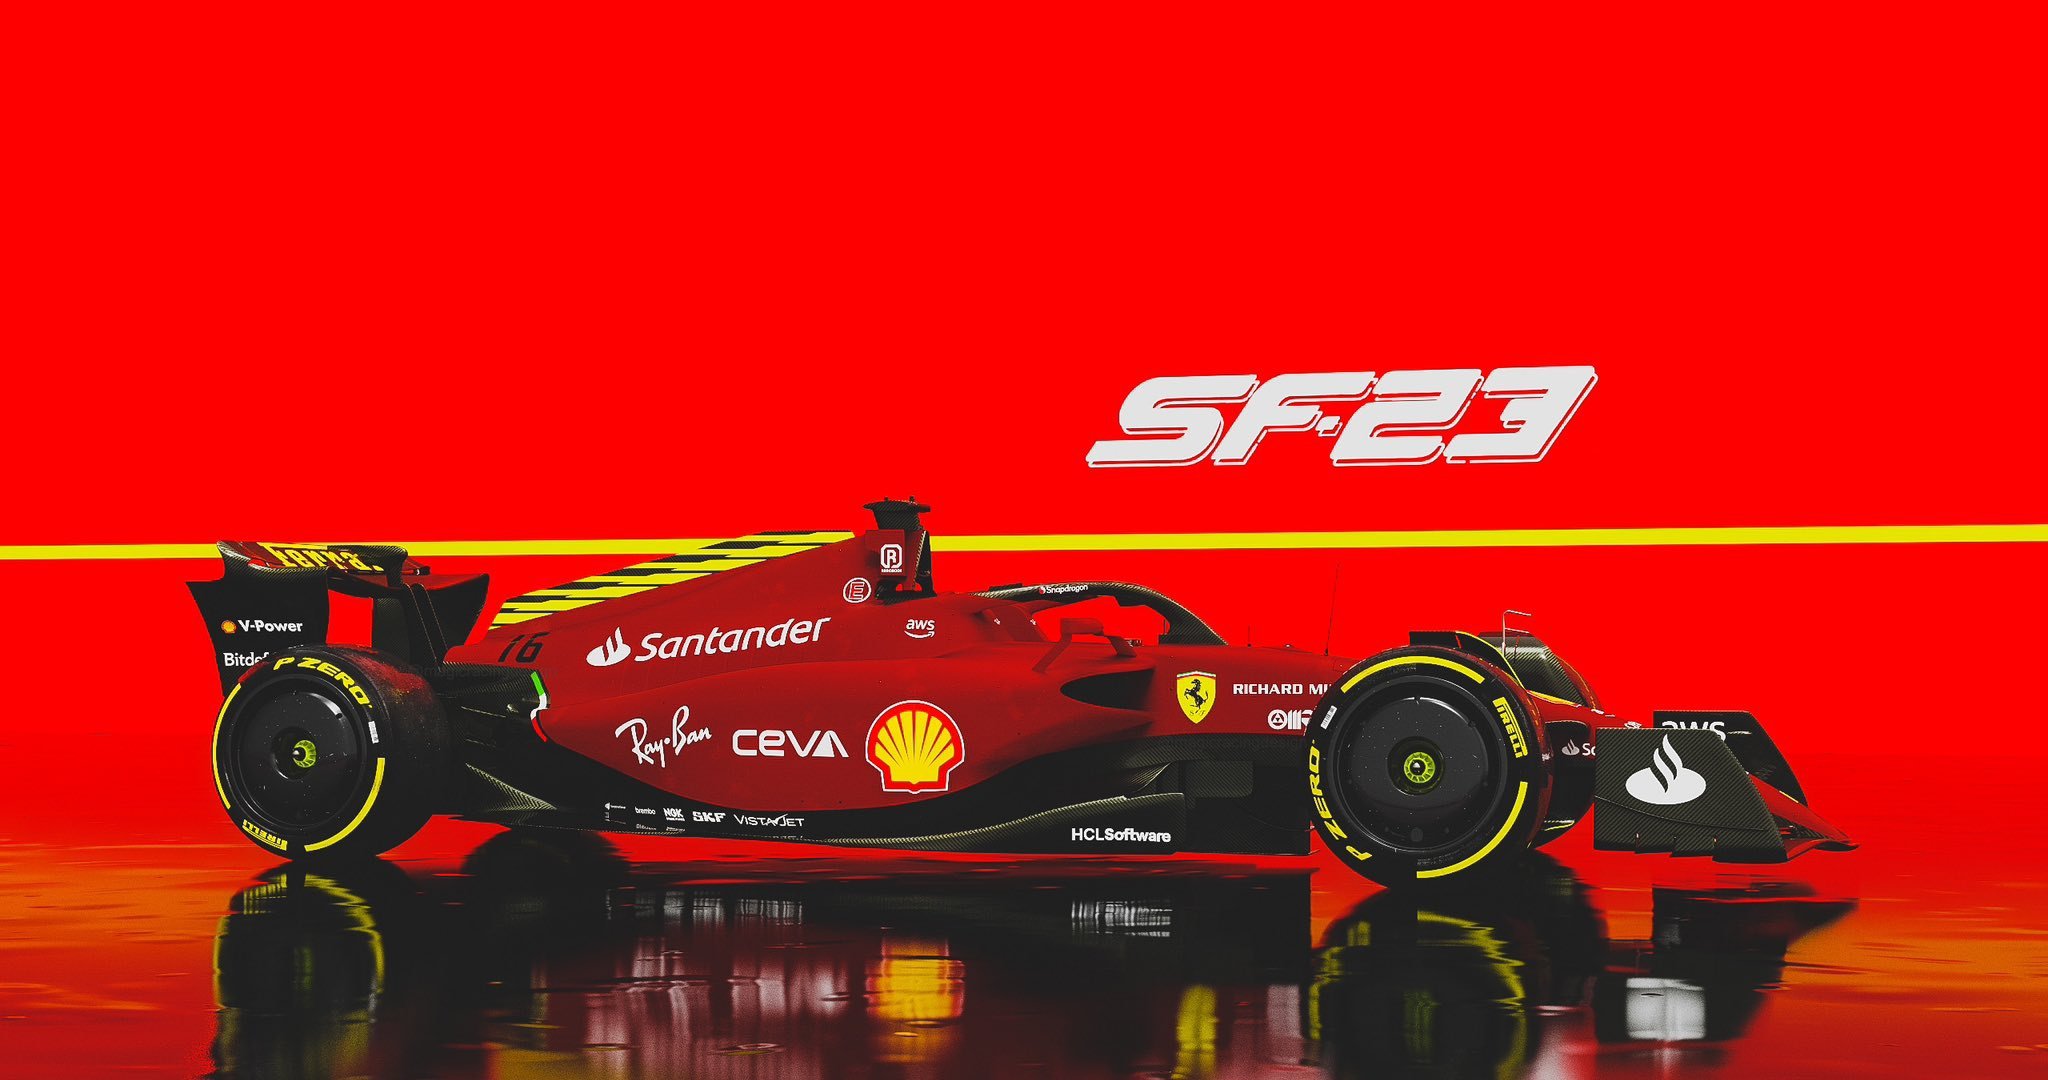 136 laps for the SF23 on its debut in Bahrain